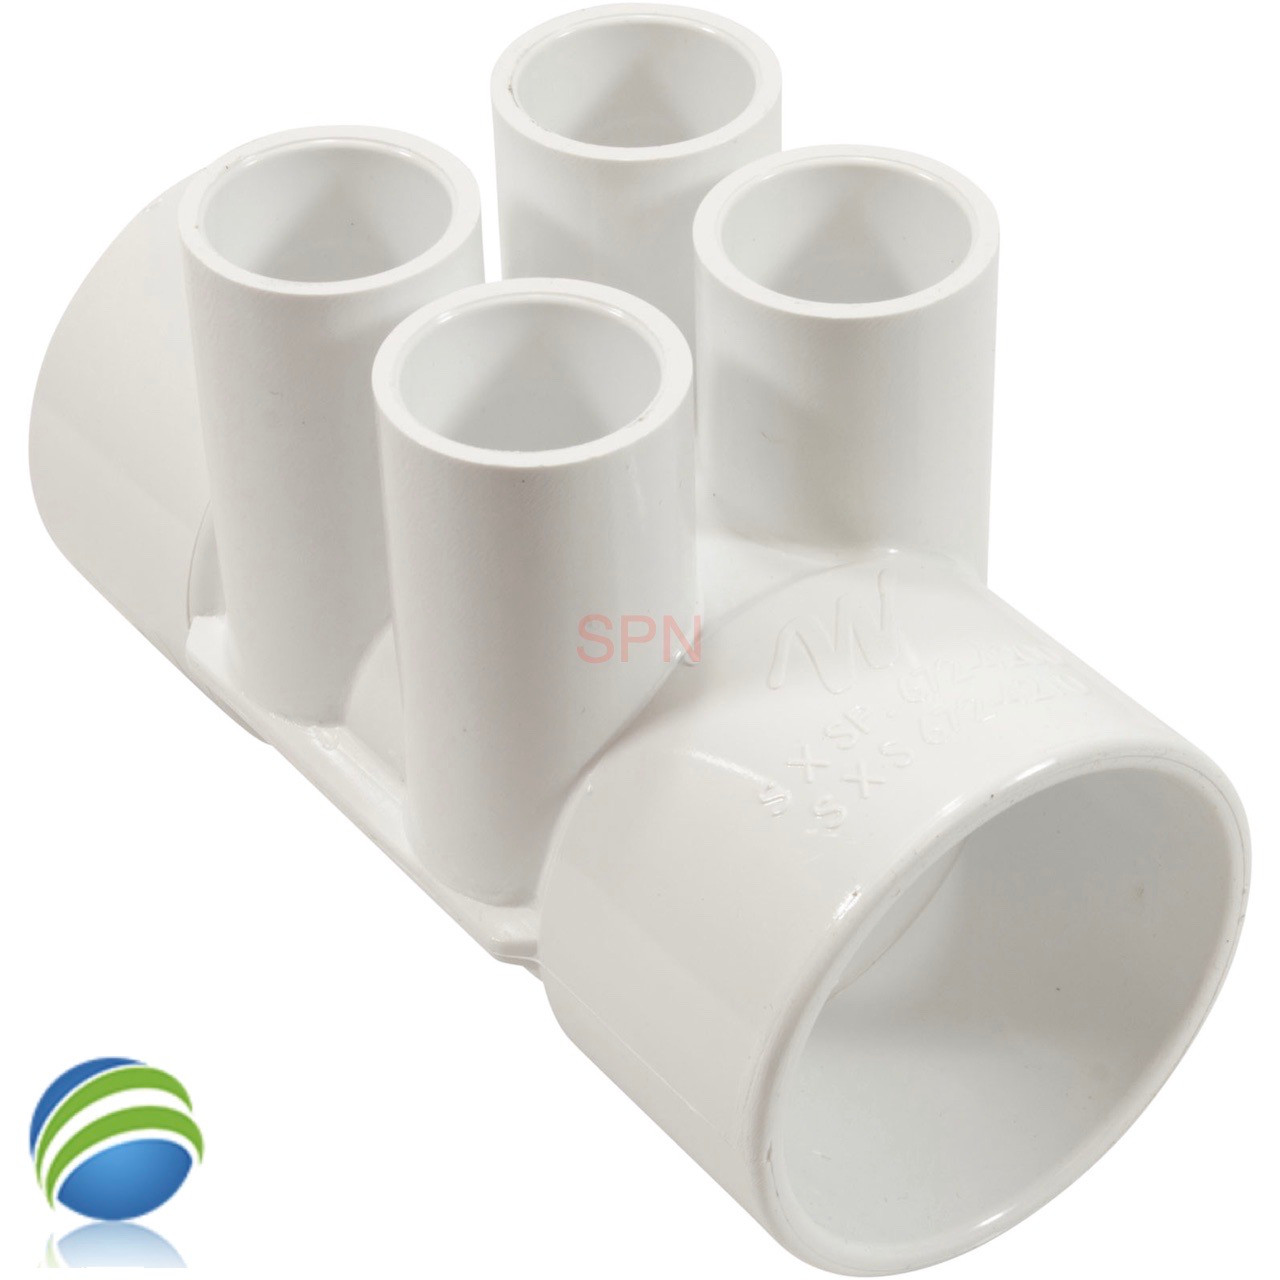 Water Manifold 2" Slip x 2" Slip x (4) 3/4" Slip
This manifold is Open on both ends.. One end receives a 2" Pipe or fitting that would measure 2 3/8" OD and on the other end glues inside of a 2" fitting that would measure 2 3/8" Inside Diameter..